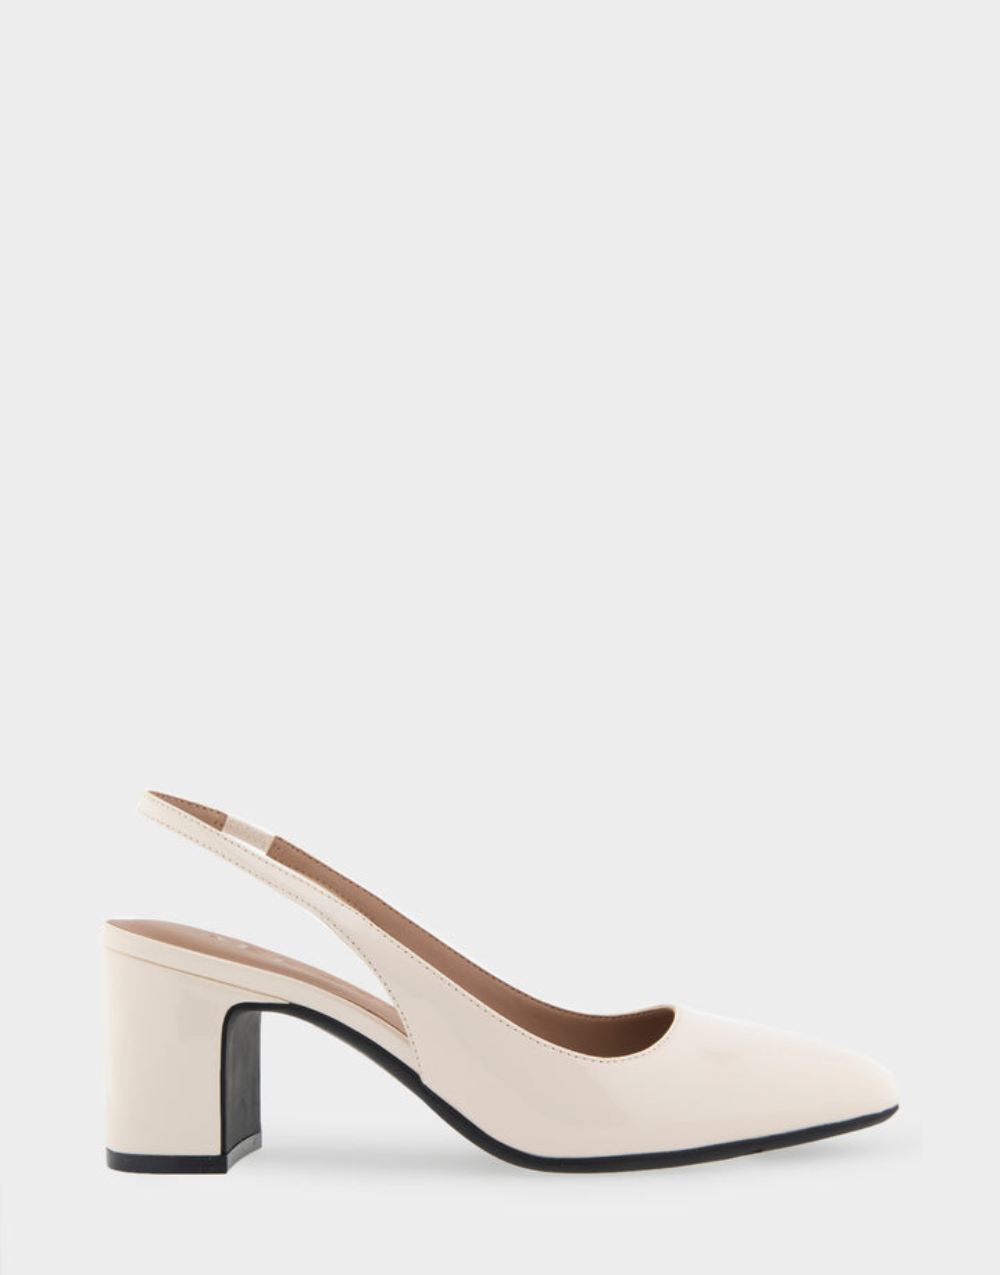 Women's | Mags Eggnog Patent Faux Leather Slingback Mid-Heel Pump